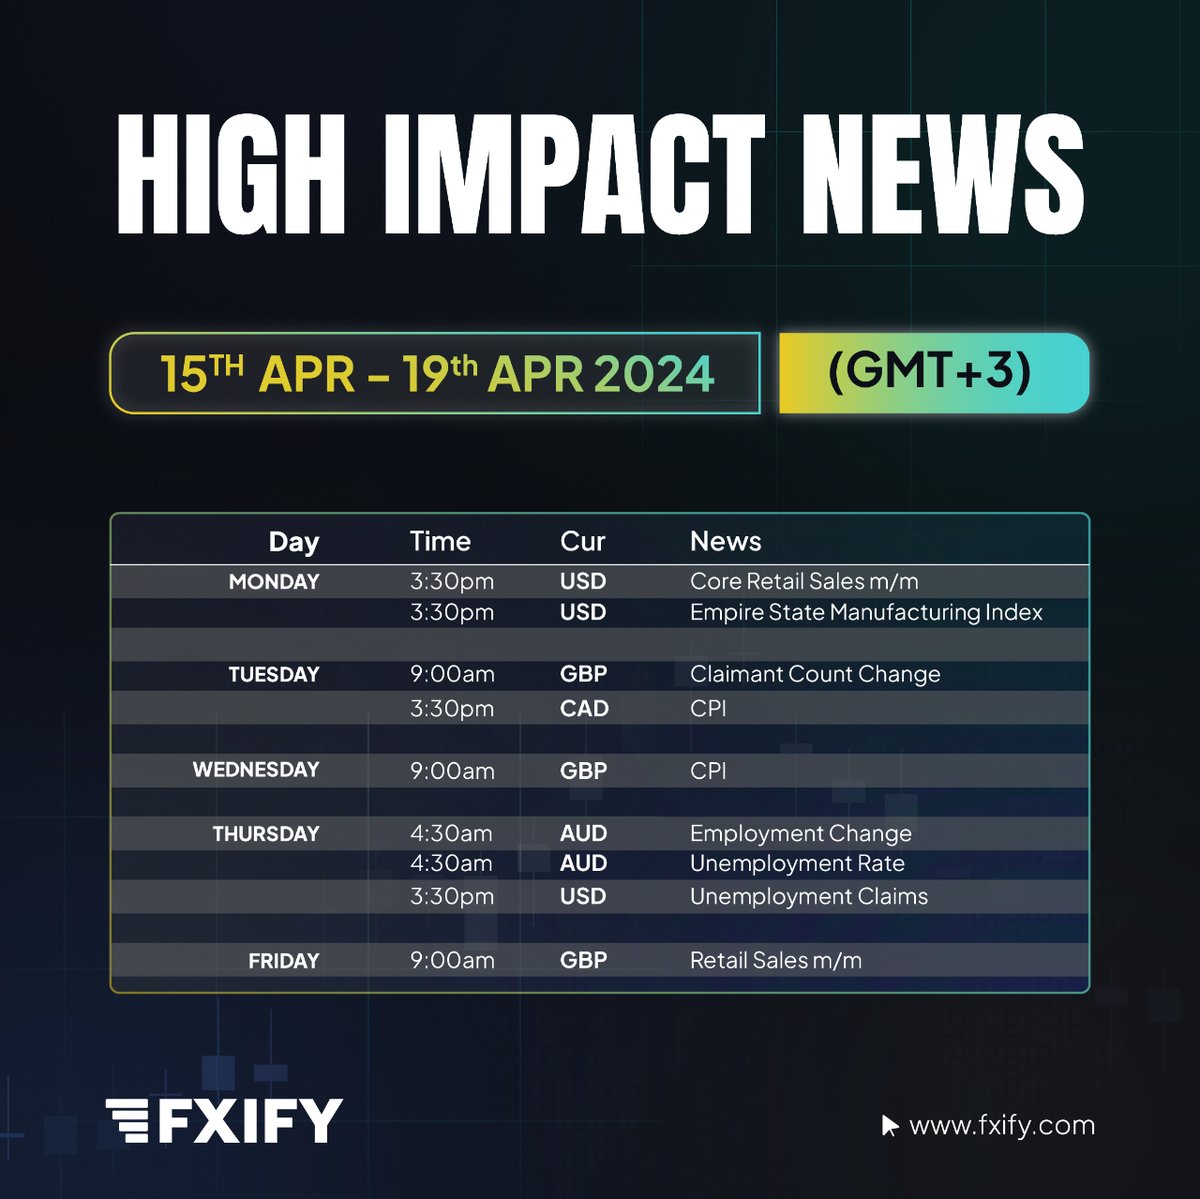 Don't get caught off guard! This week's economic calendar is packed with high-impact news. #FXIFY #highimpactnews